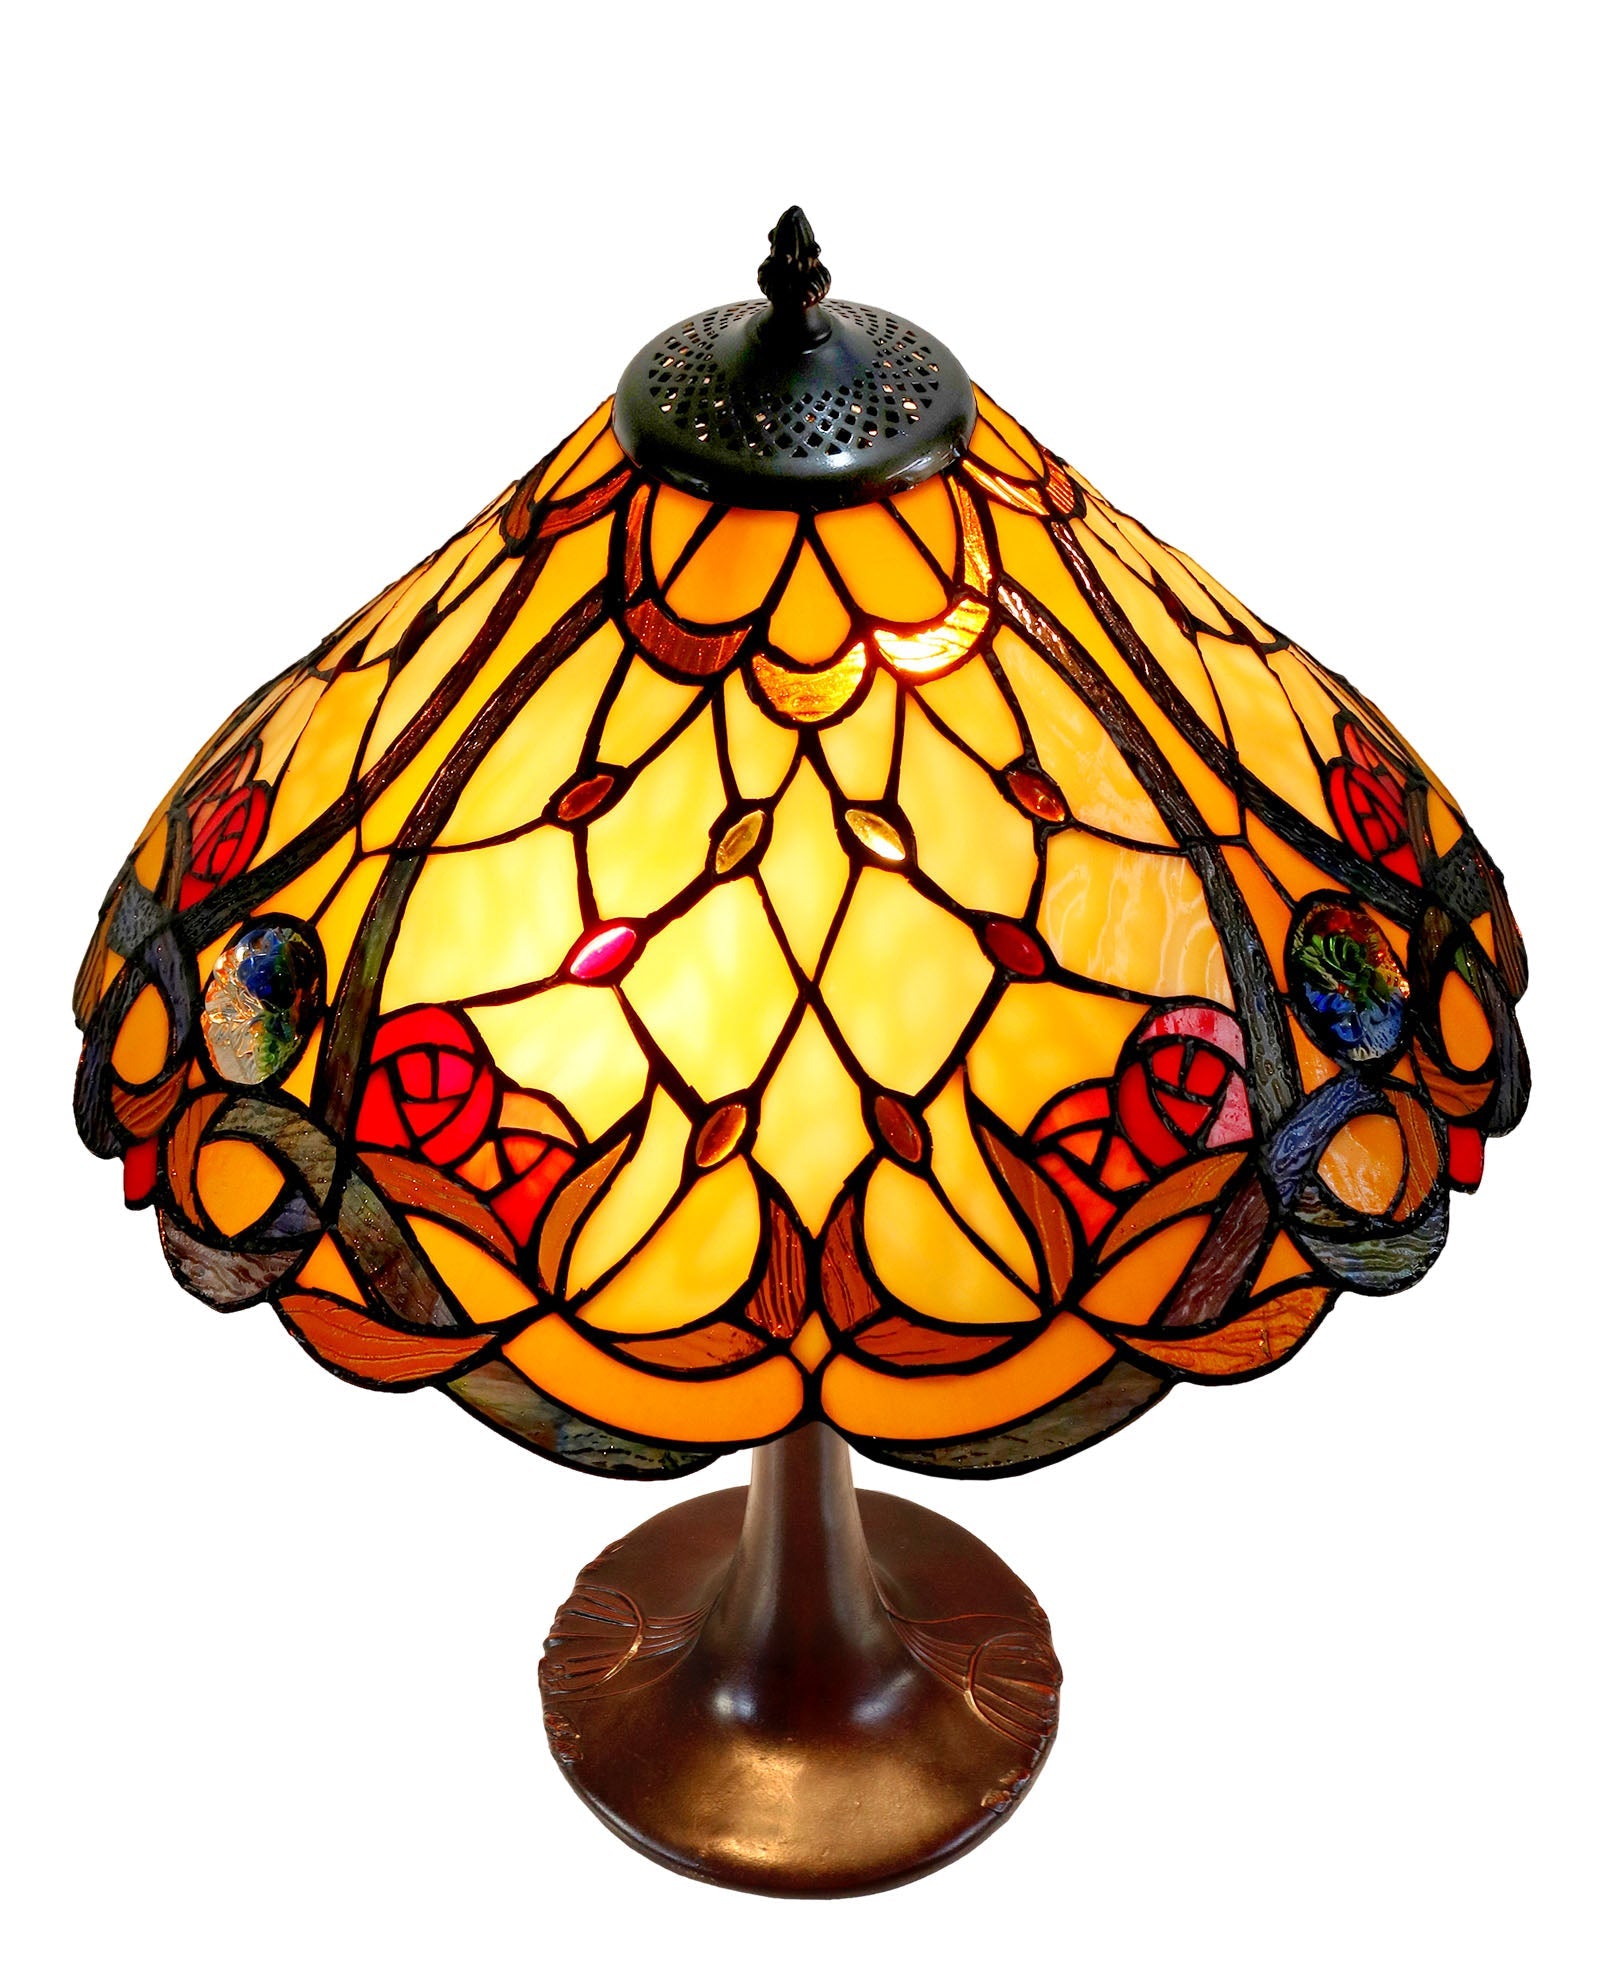 Large 16" Tiffany-style Desert Rose Stained Glass 23-inches High Table Lamp